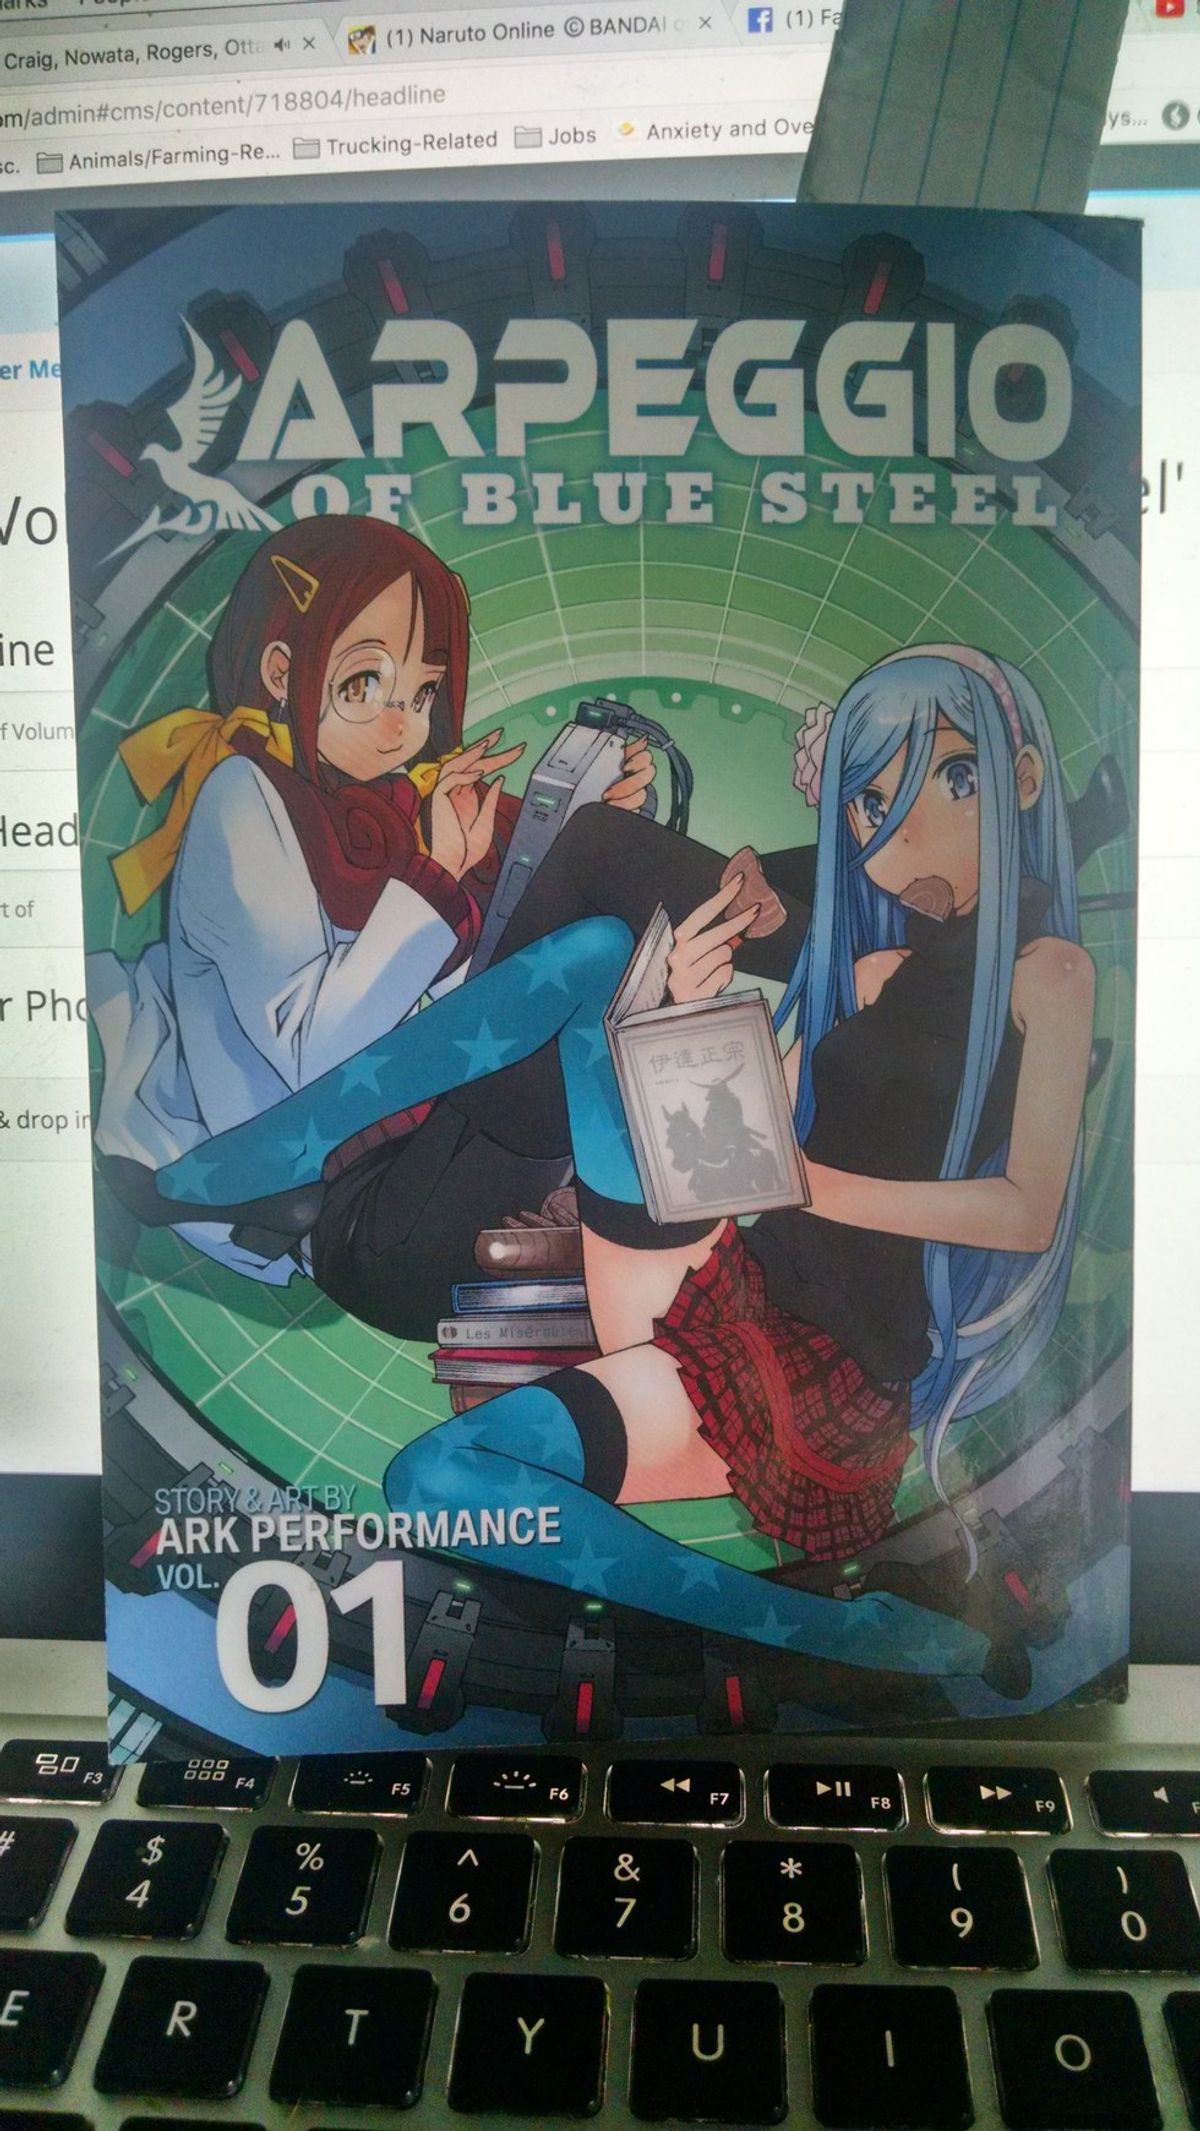 Review of Volume I of the 'Arpeggio of Blue Steel' Manga Series